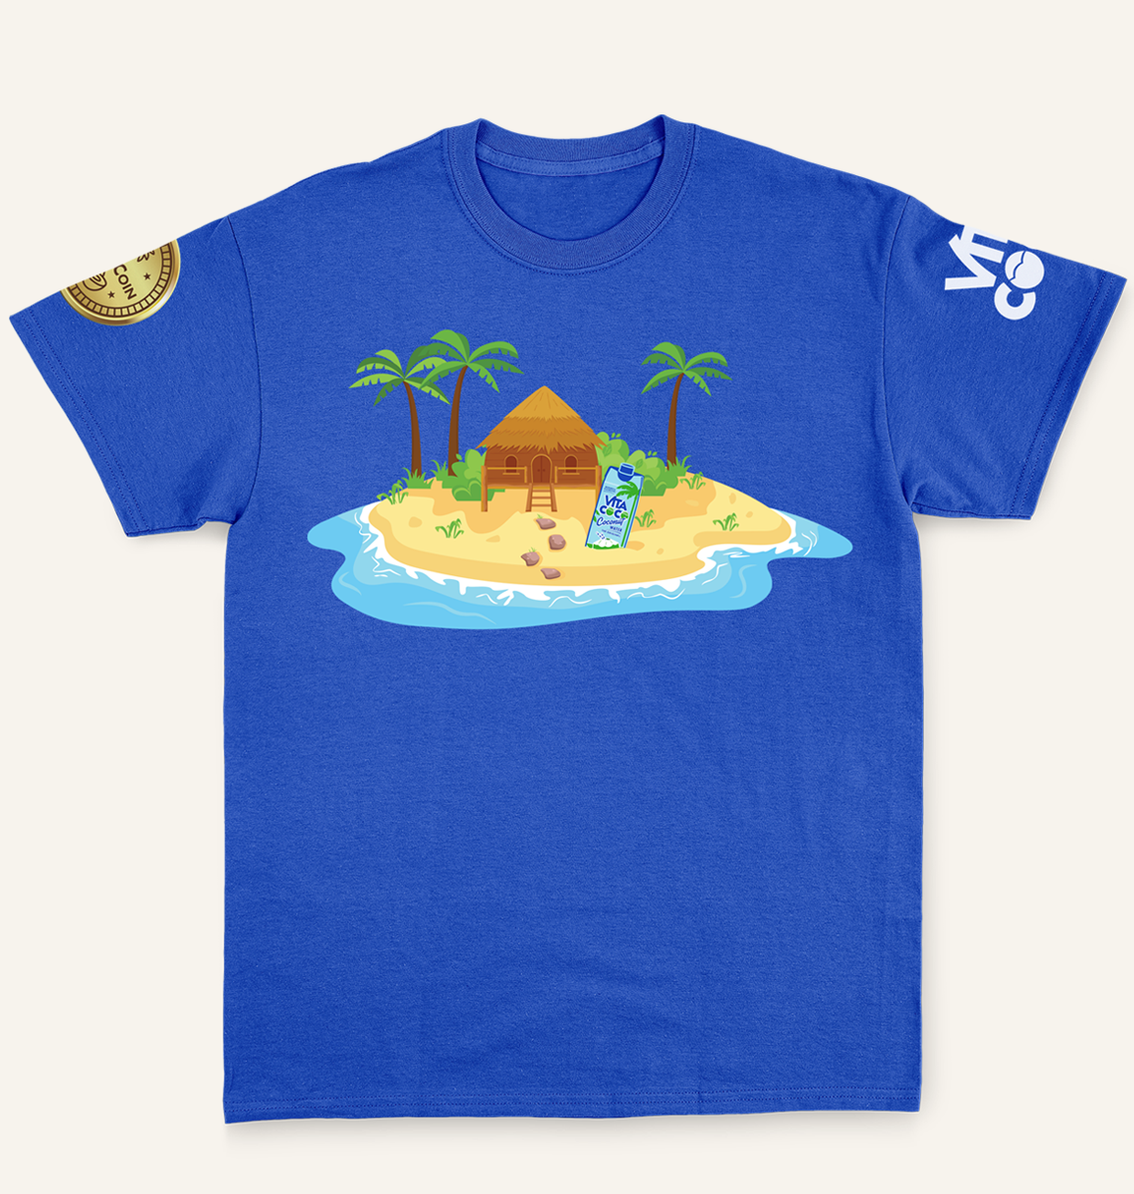 A Vita Coco Coconut Grove T-Shirt - a limited-edition blue t-shirt featuring a hut on an island, inspired by Vita Coco's commitment to a sustainable future.